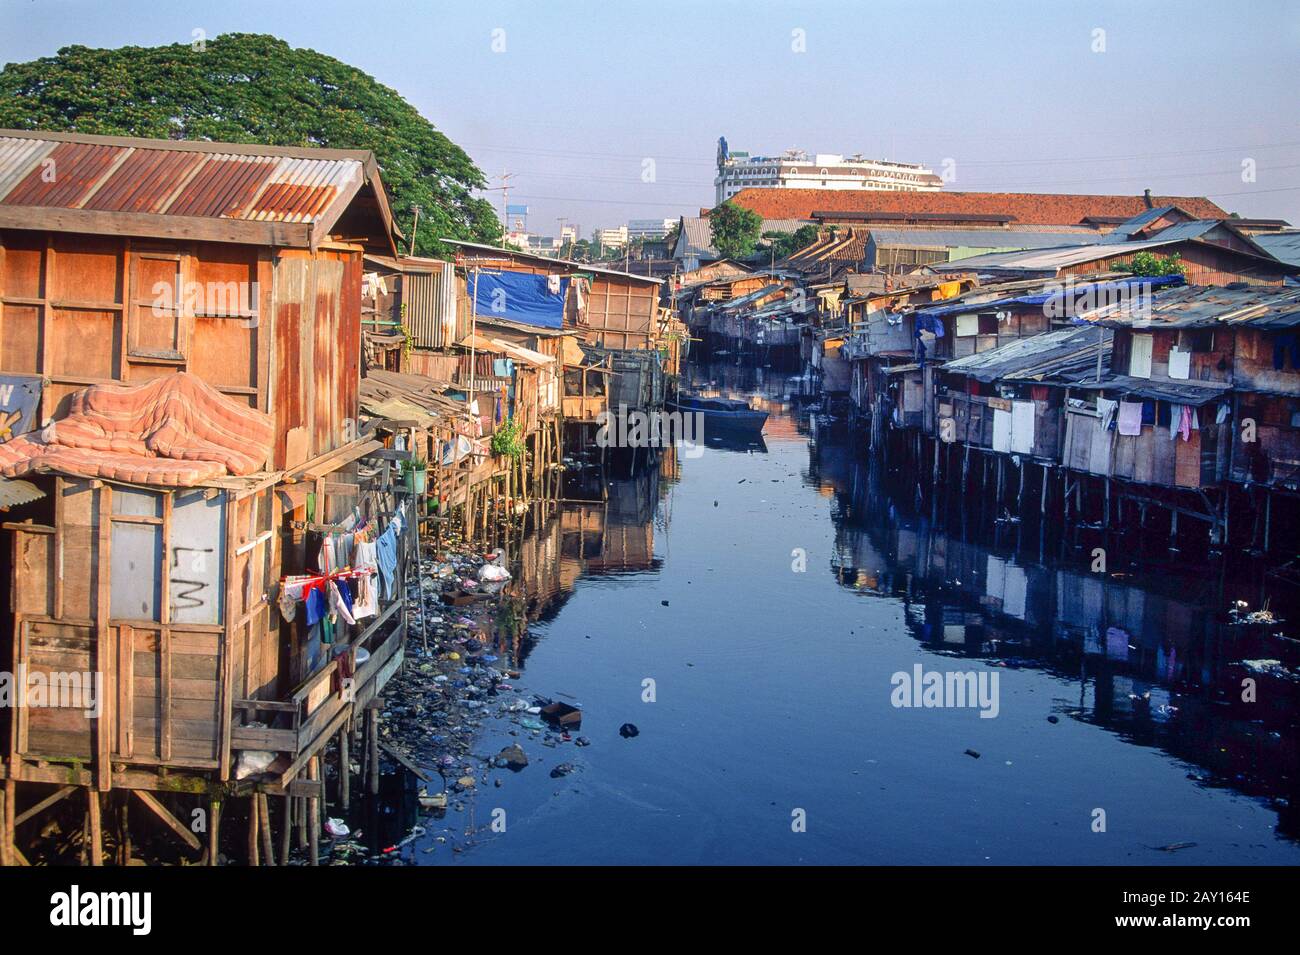 Riverside slum homes made up of shacks along a canal strewn with rubbish in Jakarta, Indonesia, June 1995 Stock Photo